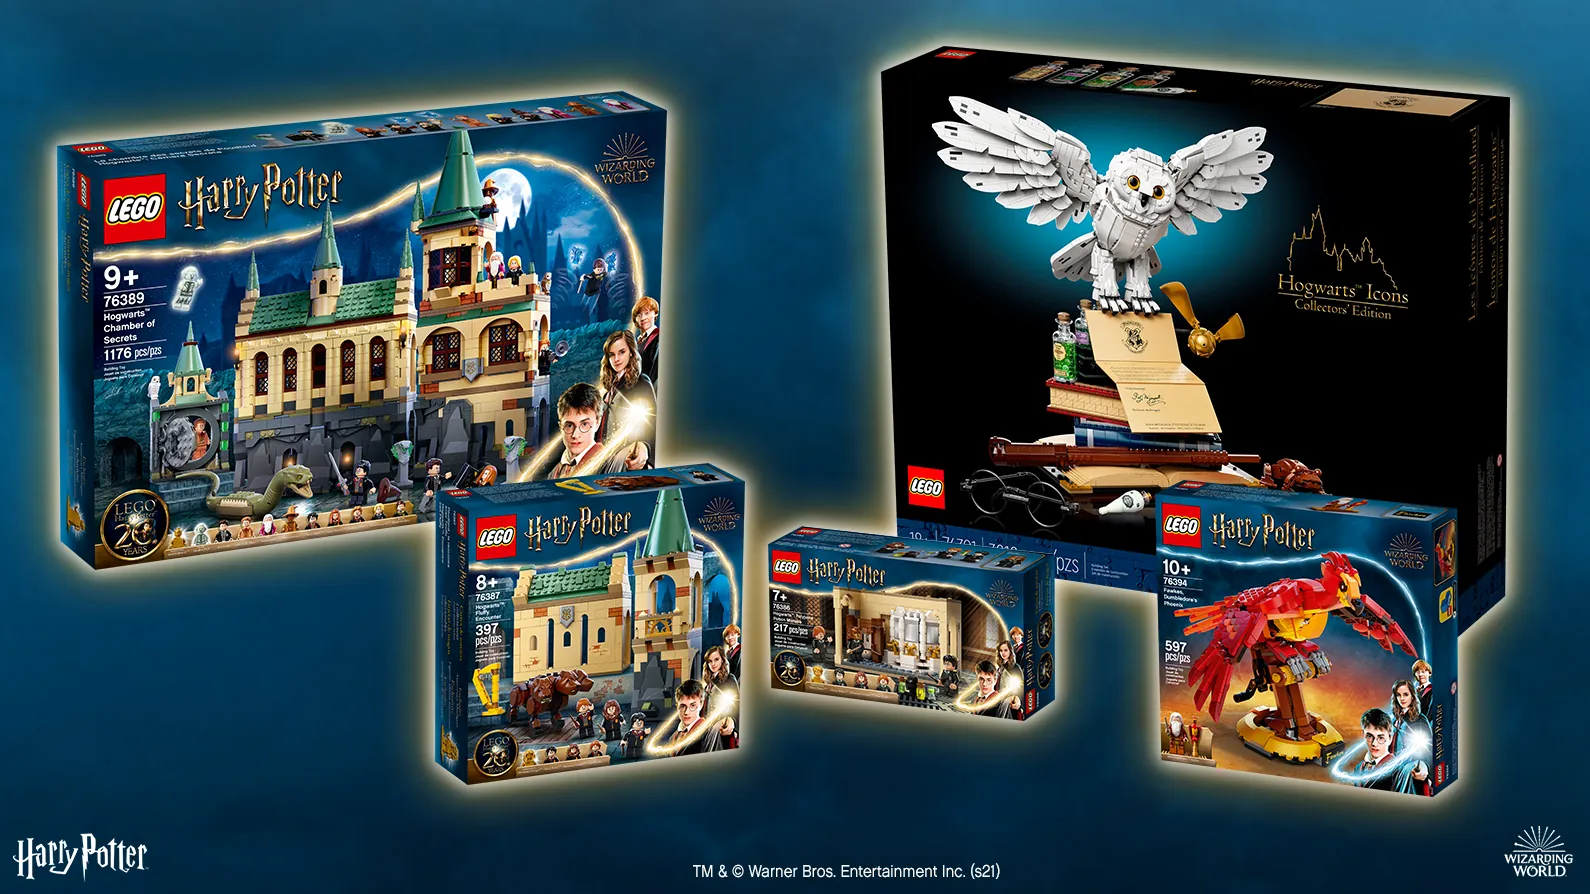 Lego Ideas Building Contest For Lego Harry Potter th Anniversary The Brick Fan